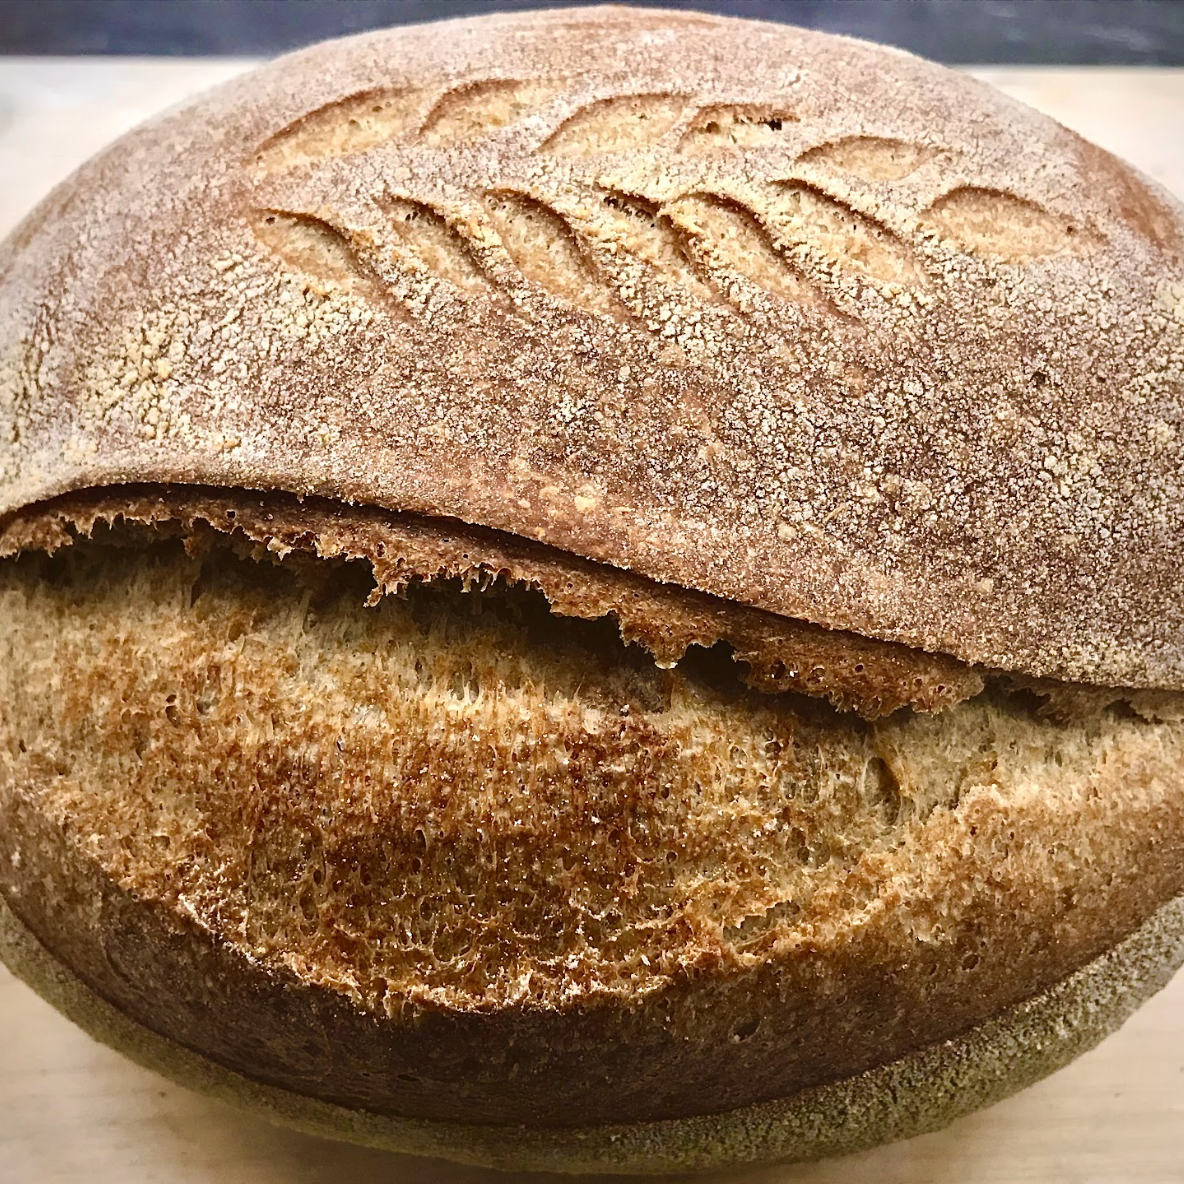 <h4>Bread</h4>
Every day Breads are Whole Wheat Loaf, Anadama Loaf, Multigrain Loaf, Country Sourdough Boule, Pain de Mie Loaf & Baguettes. 
Bread special on Saturday is Pain au Gruyere, English Muffins Sunday - Turmeric Leek, English Muffins